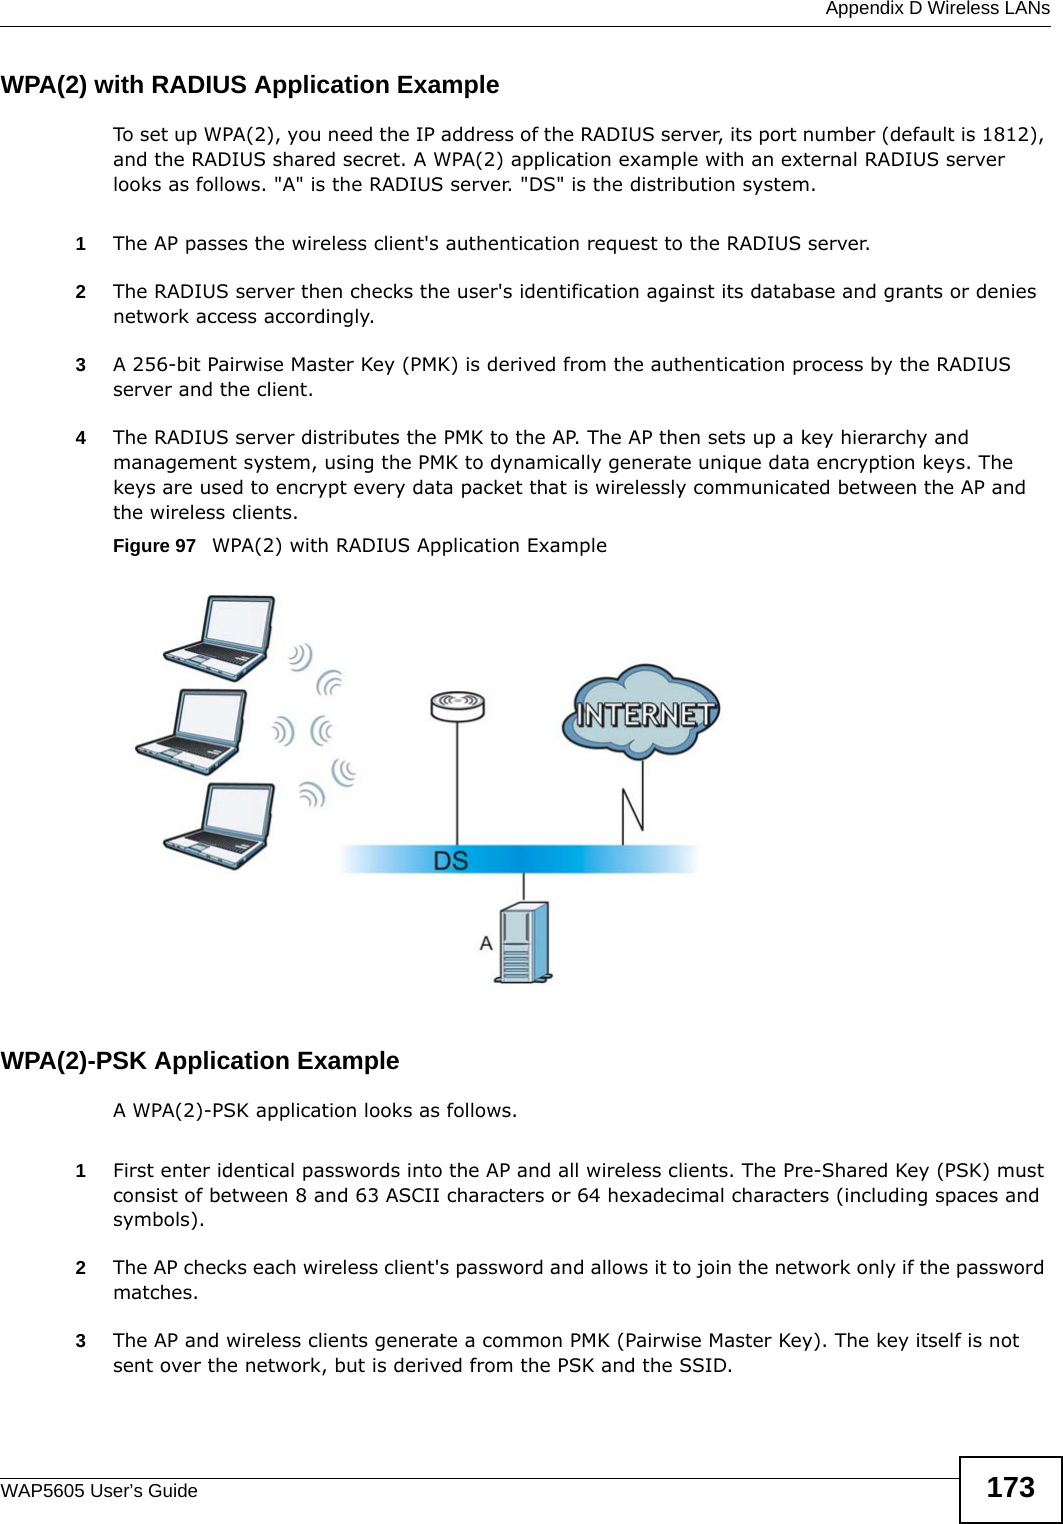  Appendix D Wireless LANsWAP5605 User’s Guide 173WPA(2) with RADIUS Application ExampleTo set up WPA(2), you need the IP address of the RADIUS server, its port number (default is 1812), and the RADIUS shared secret. A WPA(2) application example with an external RADIUS server looks as follows. &quot;A&quot; is the RADIUS server. &quot;DS&quot; is the distribution system.1The AP passes the wireless client&apos;s authentication request to the RADIUS server.2The RADIUS server then checks the user&apos;s identification against its database and grants or denies network access accordingly.3A 256-bit Pairwise Master Key (PMK) is derived from the authentication process by the RADIUS server and the client.4The RADIUS server distributes the PMK to the AP. The AP then sets up a key hierarchy and management system, using the PMK to dynamically generate unique data encryption keys. The keys are used to encrypt every data packet that is wirelessly communicated between the AP and the wireless clients.Figure 97   WPA(2) with RADIUS Application ExampleWPA(2)-PSK Application ExampleA WPA(2)-PSK application looks as follows.1First enter identical passwords into the AP and all wireless clients. The Pre-Shared Key (PSK) must consist of between 8 and 63 ASCII characters or 64 hexadecimal characters (including spaces and symbols).2The AP checks each wireless client&apos;s password and allows it to join the network only if the password matches.3The AP and wireless clients generate a common PMK (Pairwise Master Key). The key itself is not sent over the network, but is derived from the PSK and the SSID. 